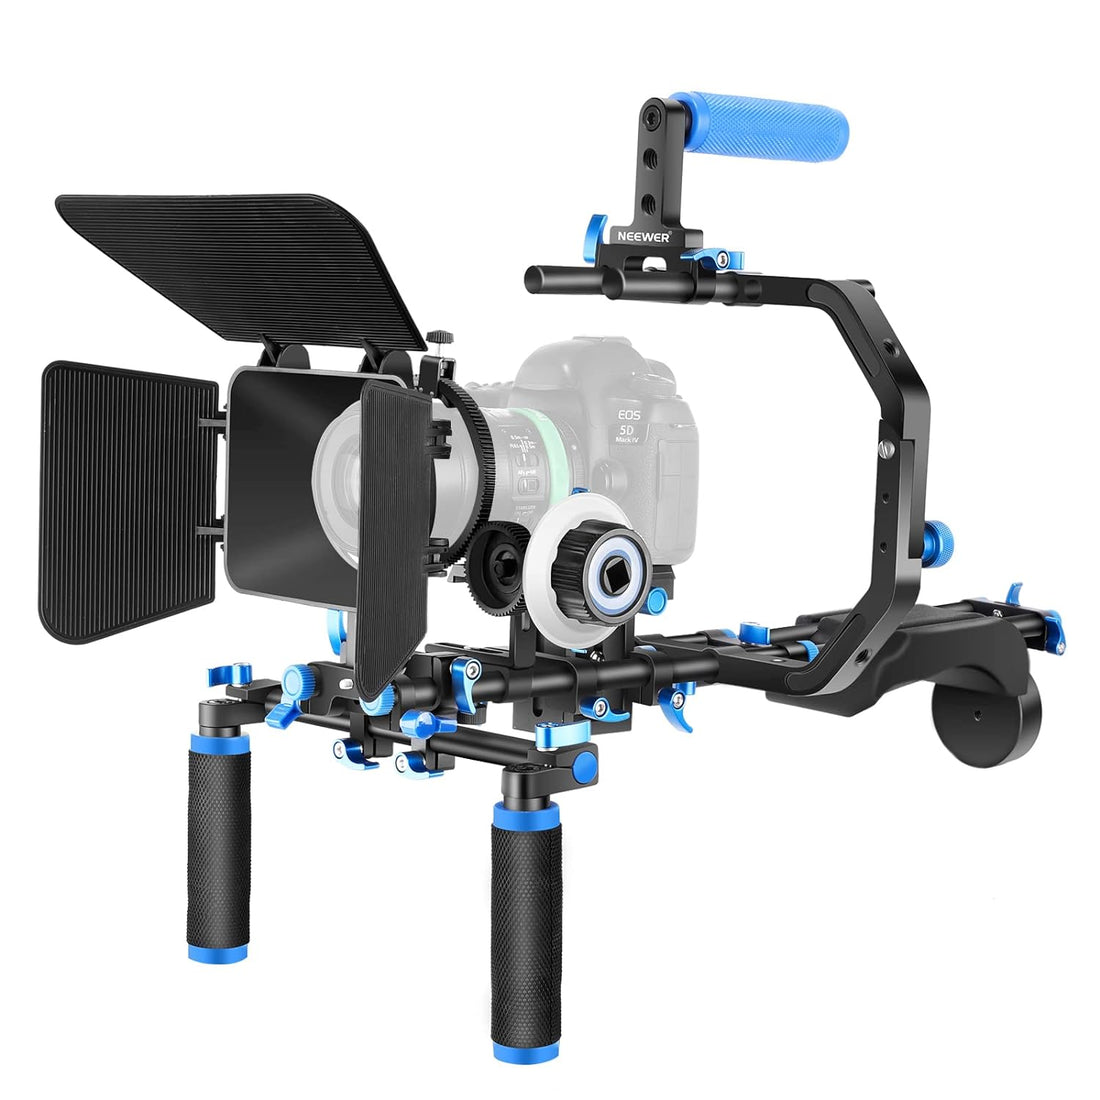 Neewer Film Movie System Kit Video Making System for Canon/Nikon/Sony and other DSLR Cameras, Blue, Black